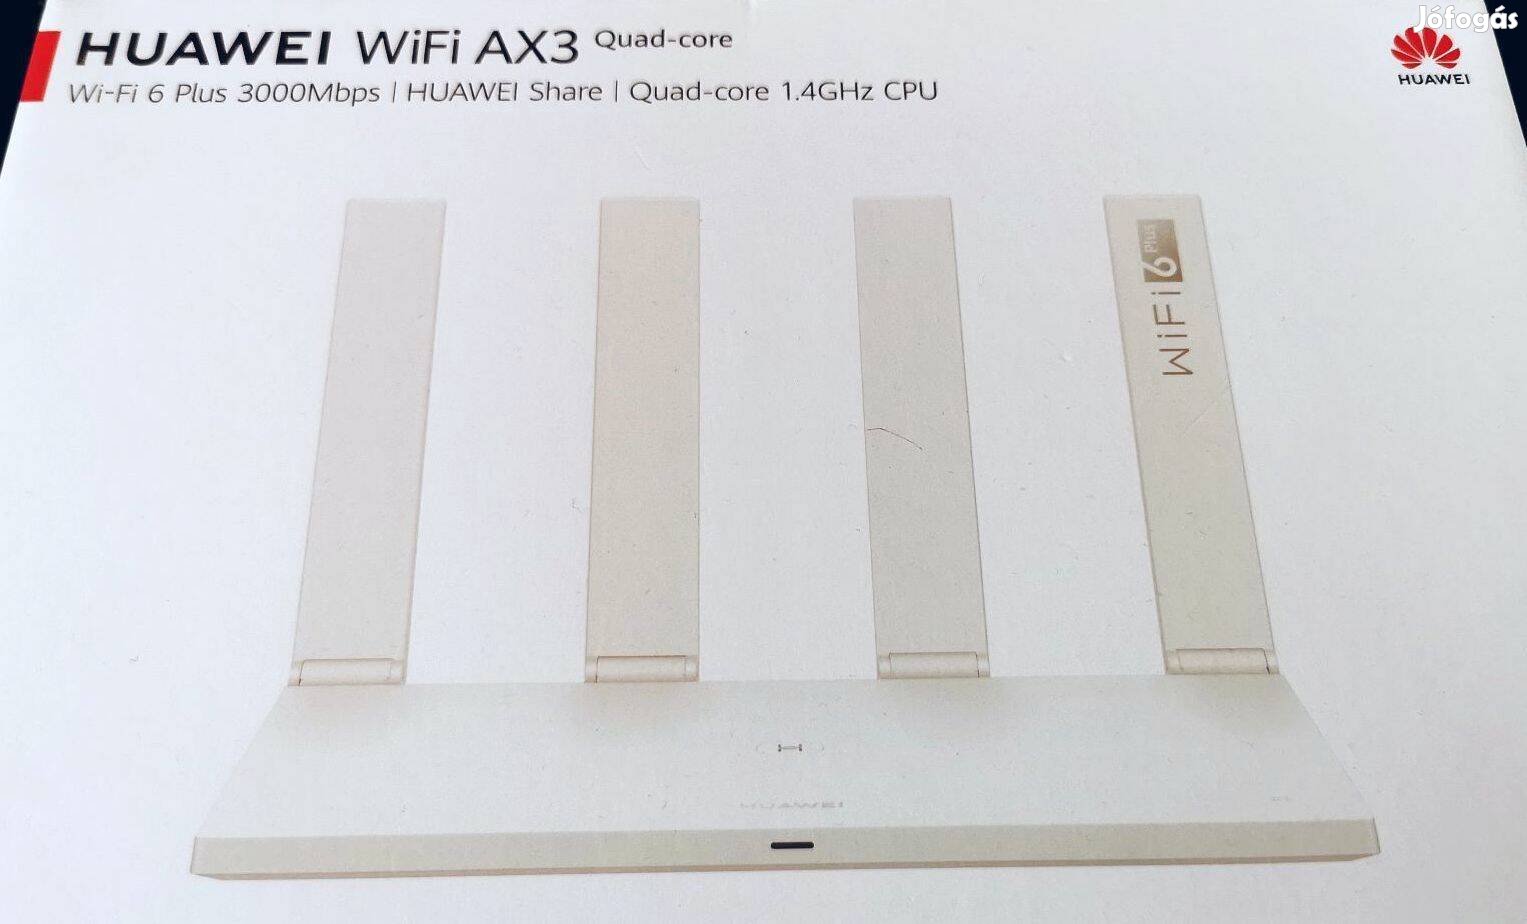 Huawei WIFI 6+ AX3 WS7200 3000Mbps router